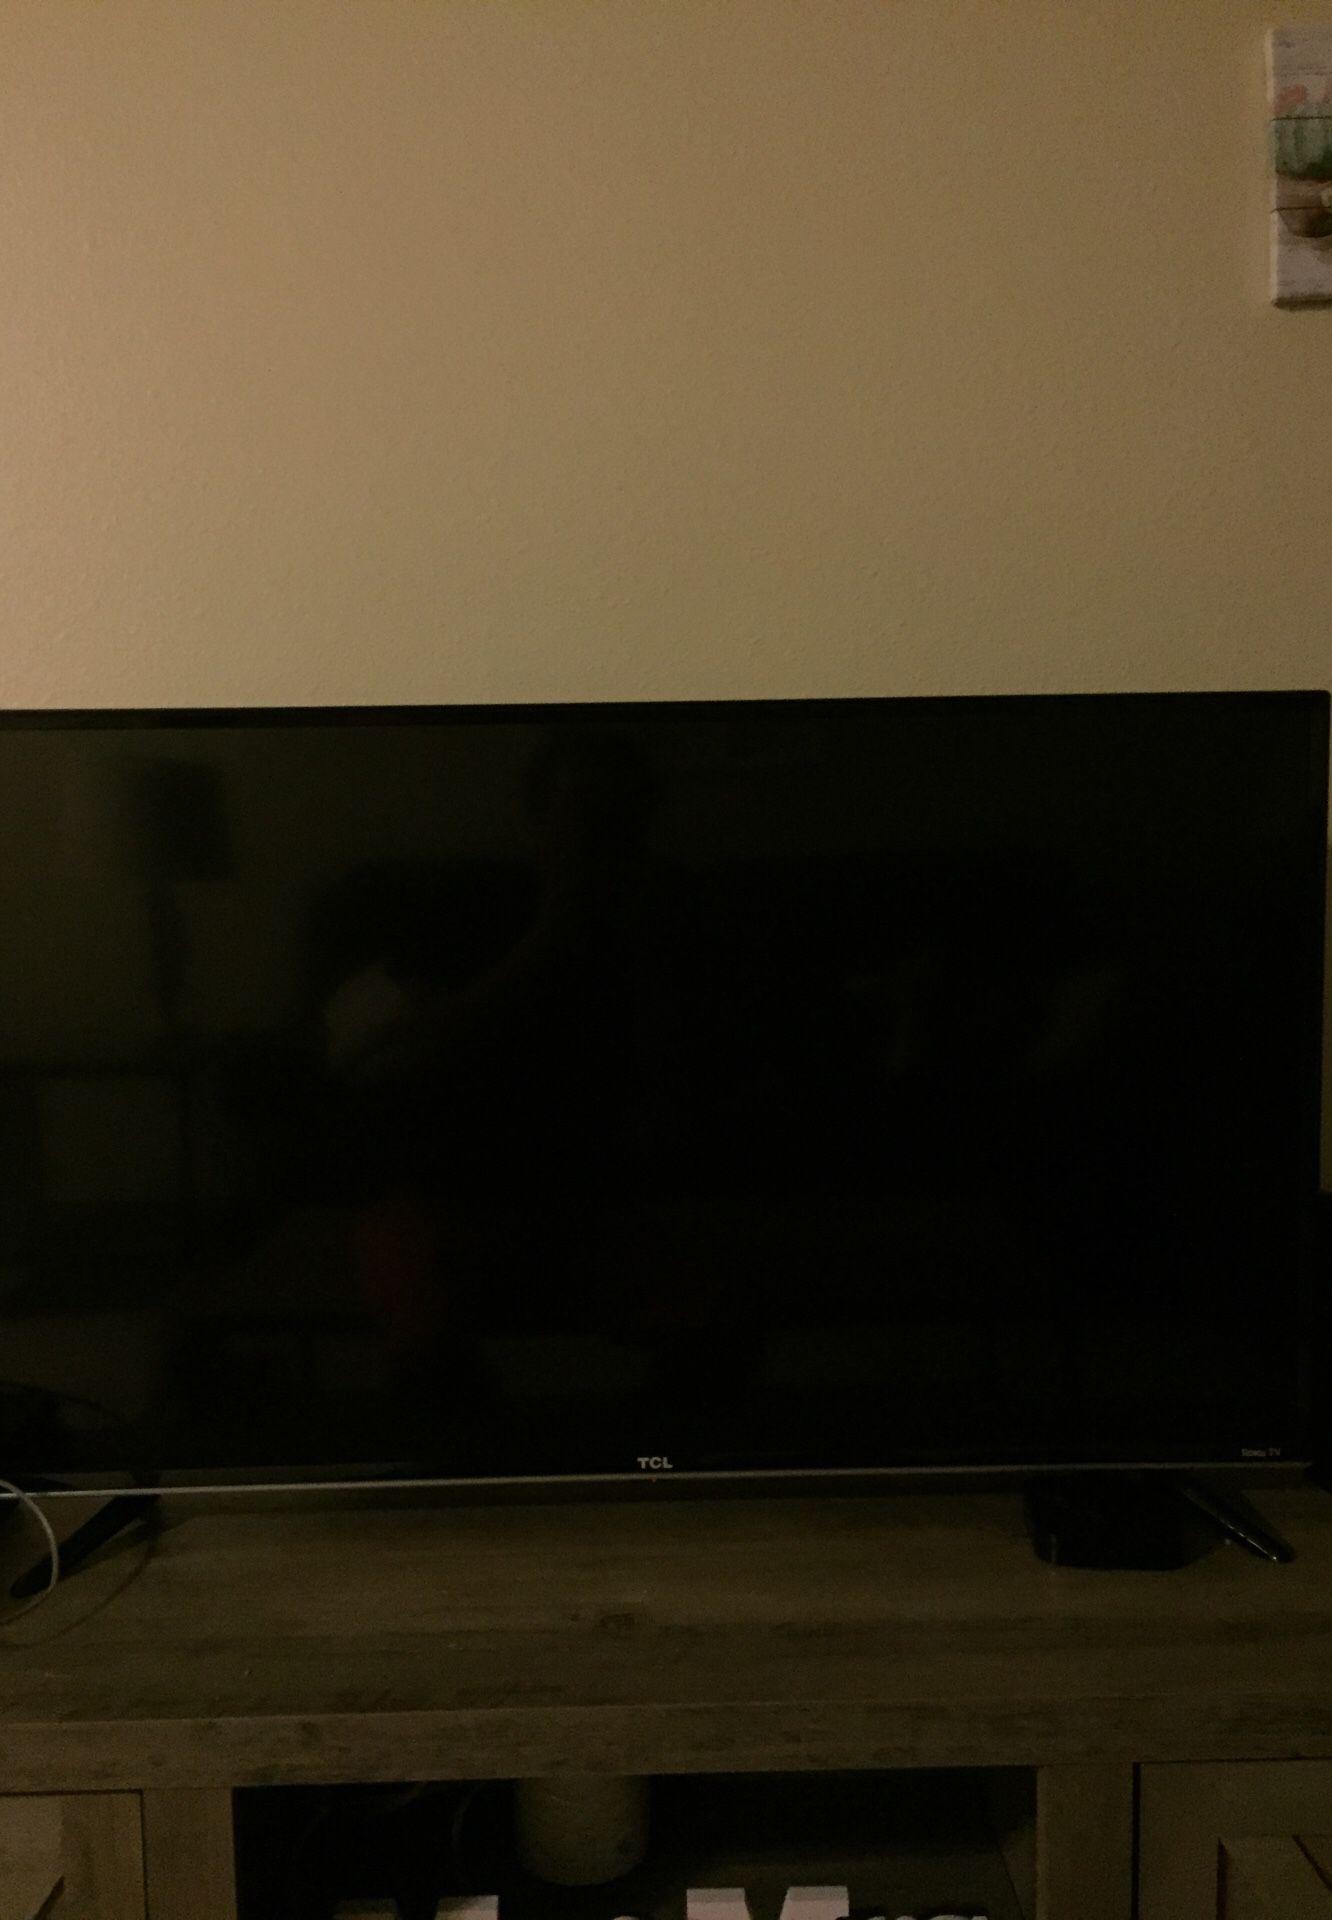 TCL Roku TV 43” Inch No controller works perfect nothings is wrong with it me and my wife just lost the controller while moving recently